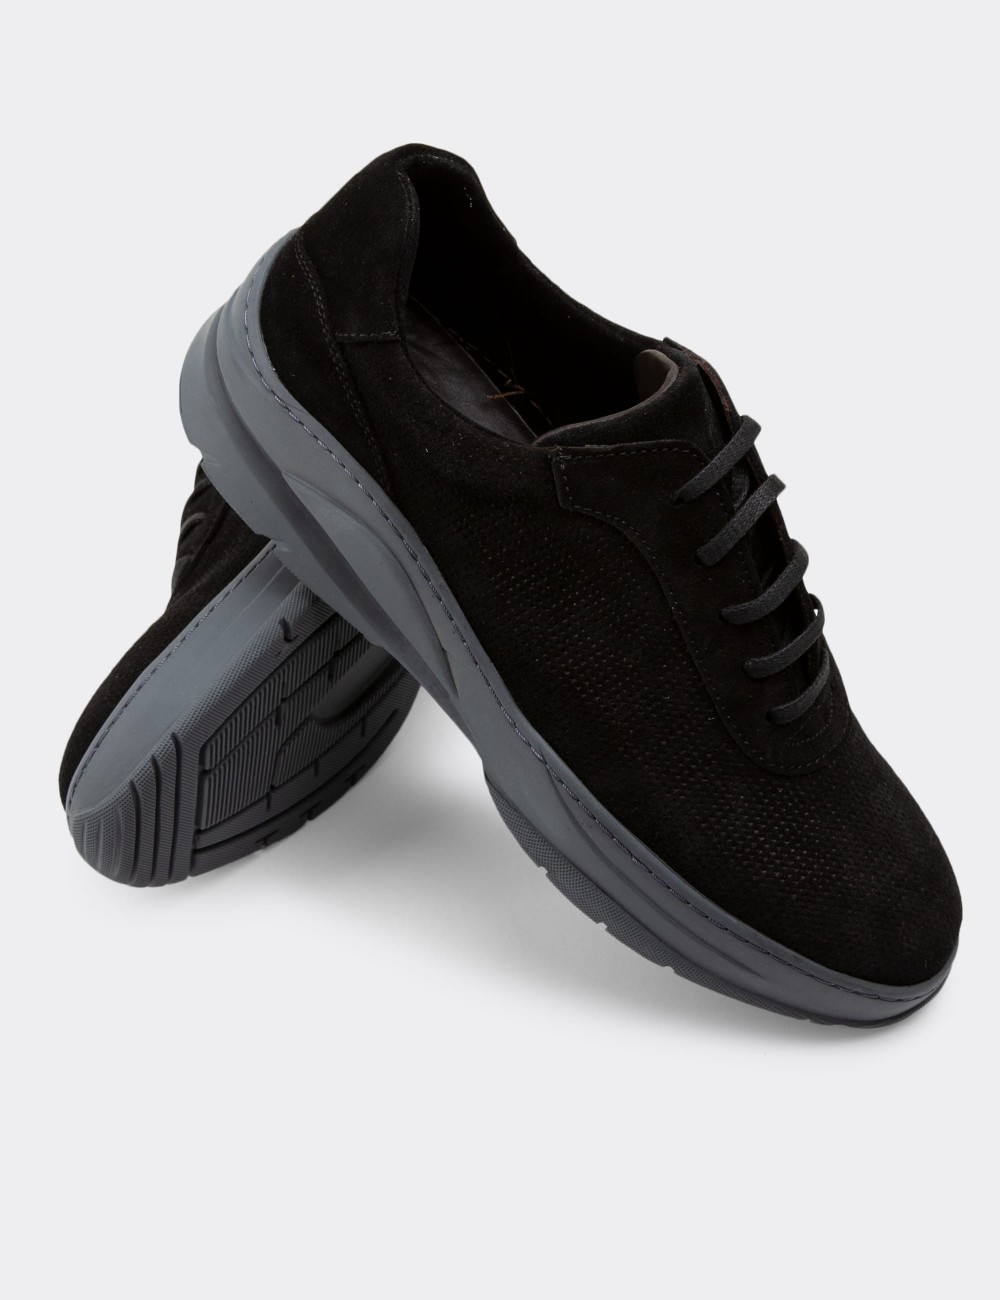 Black Suede Leather Sneakers - 01879MSYHC02